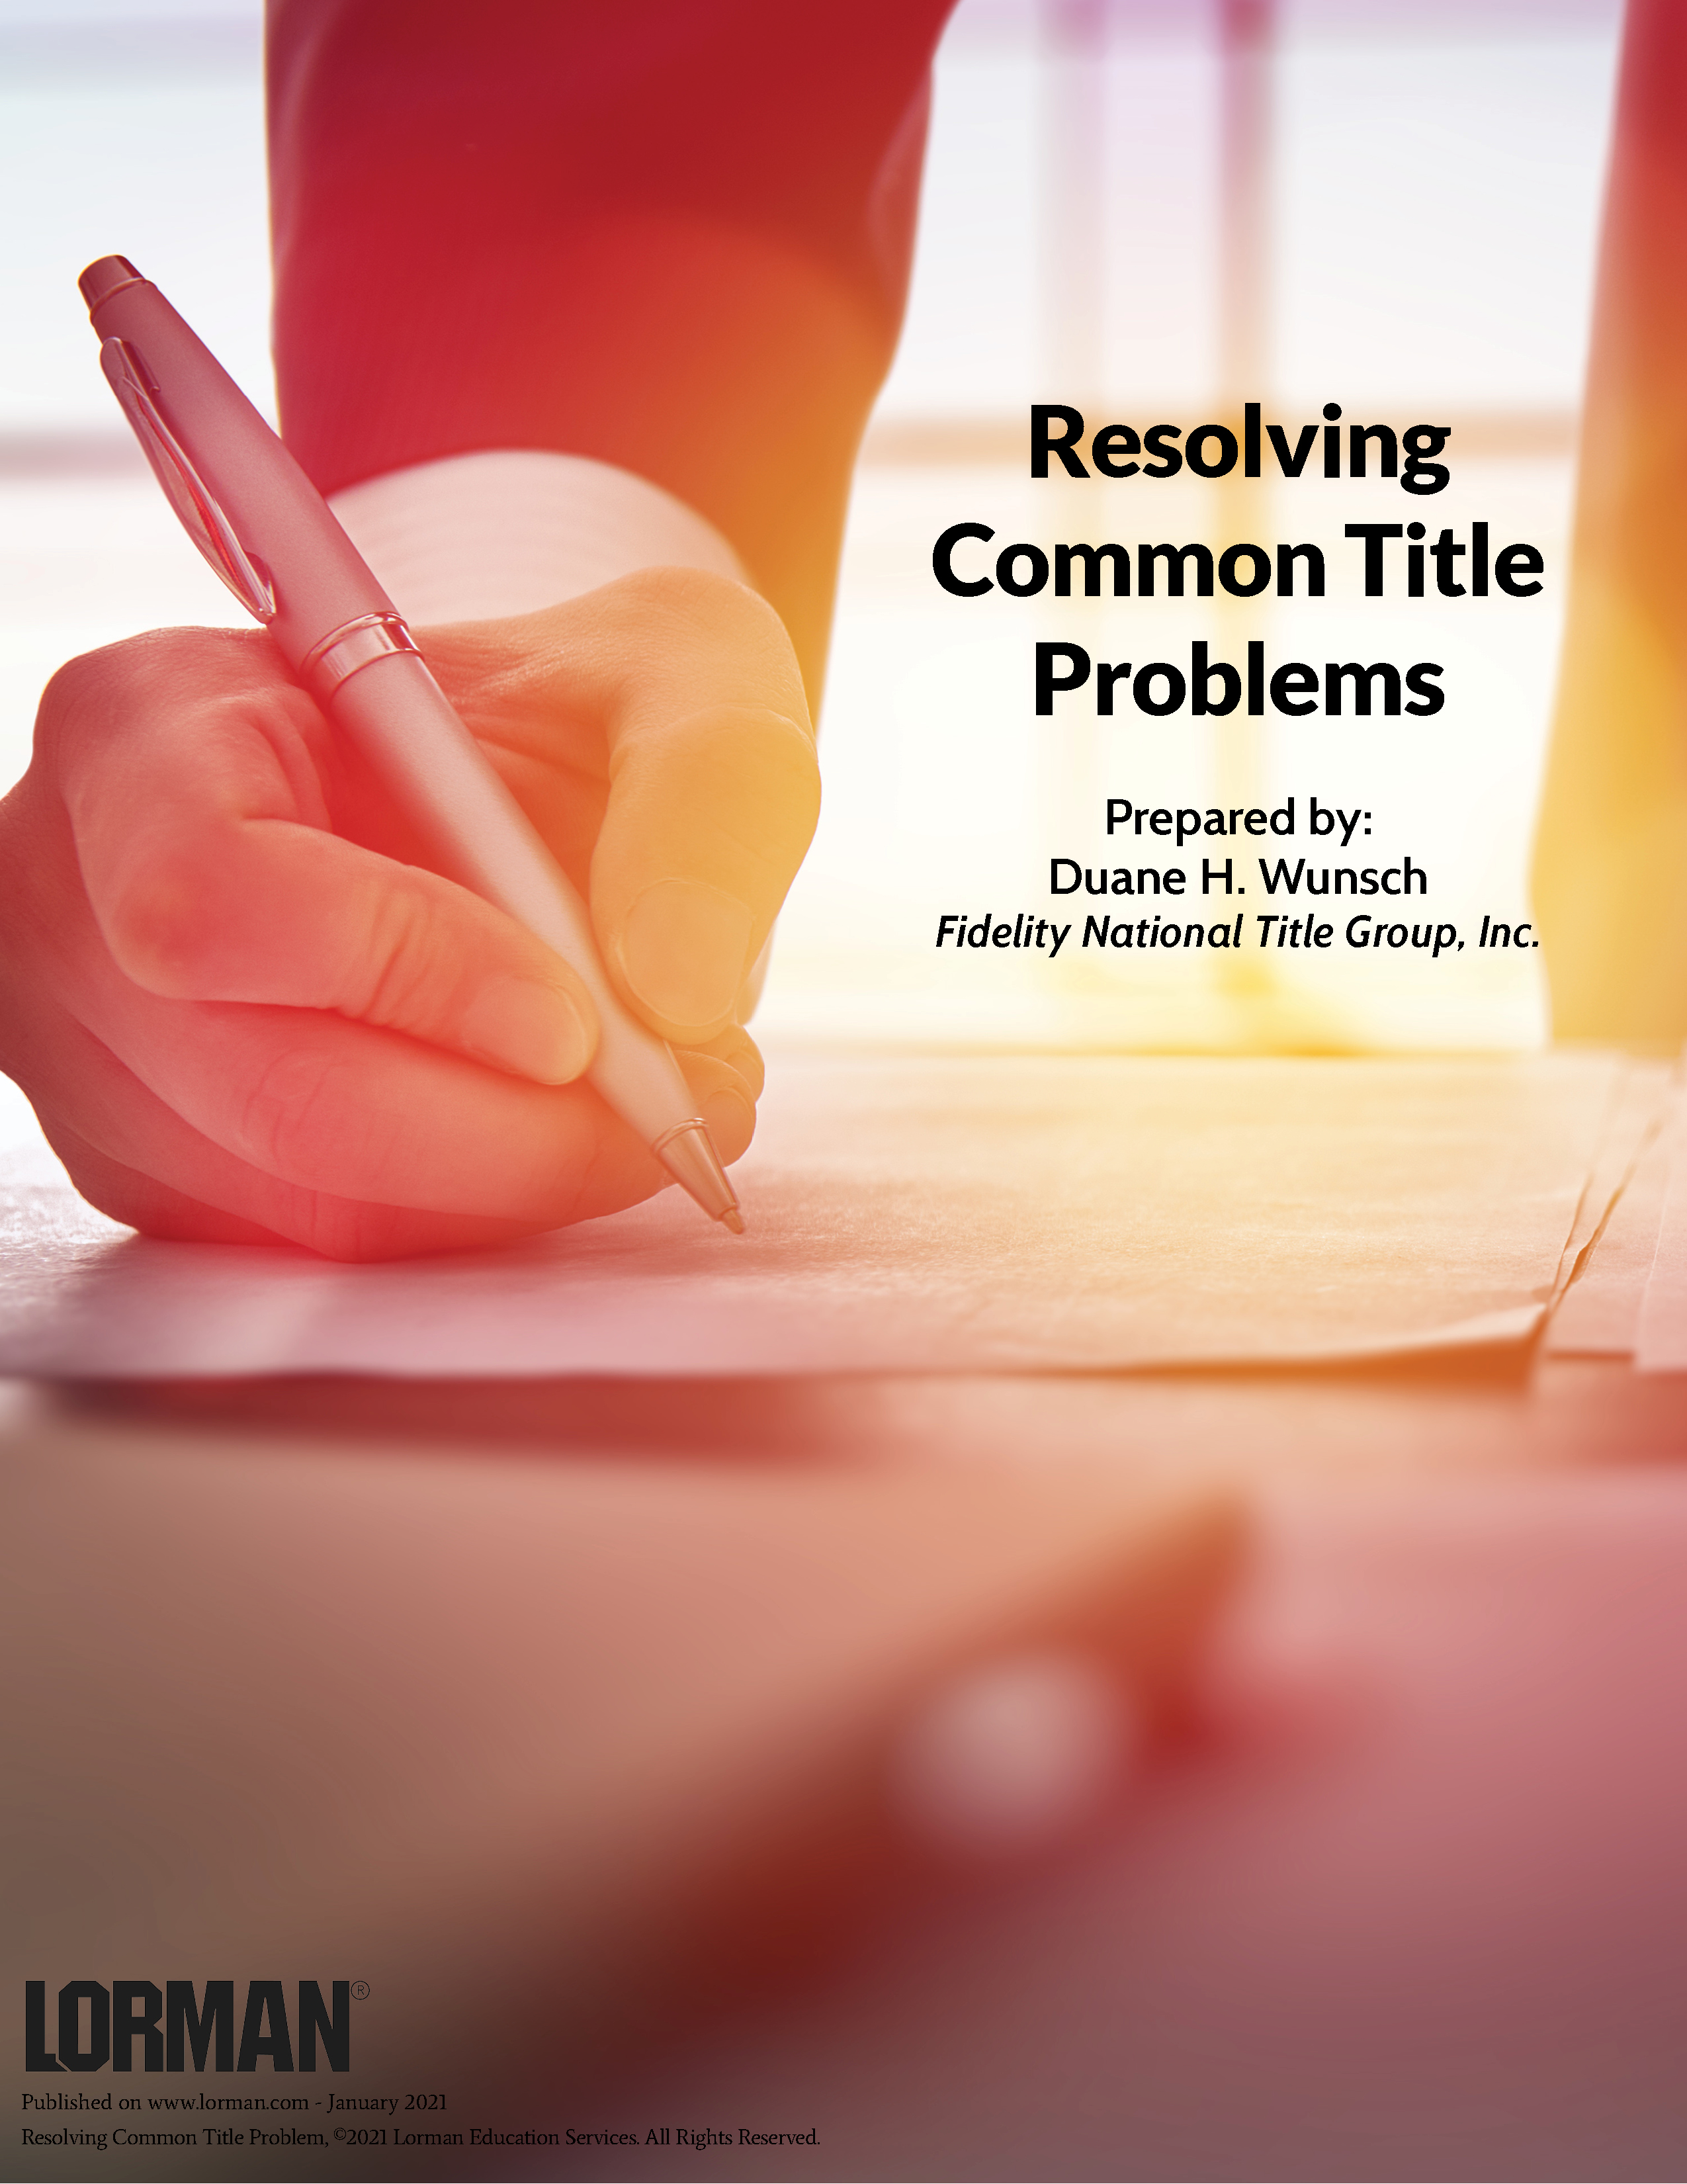 Resolving Common Title Problems